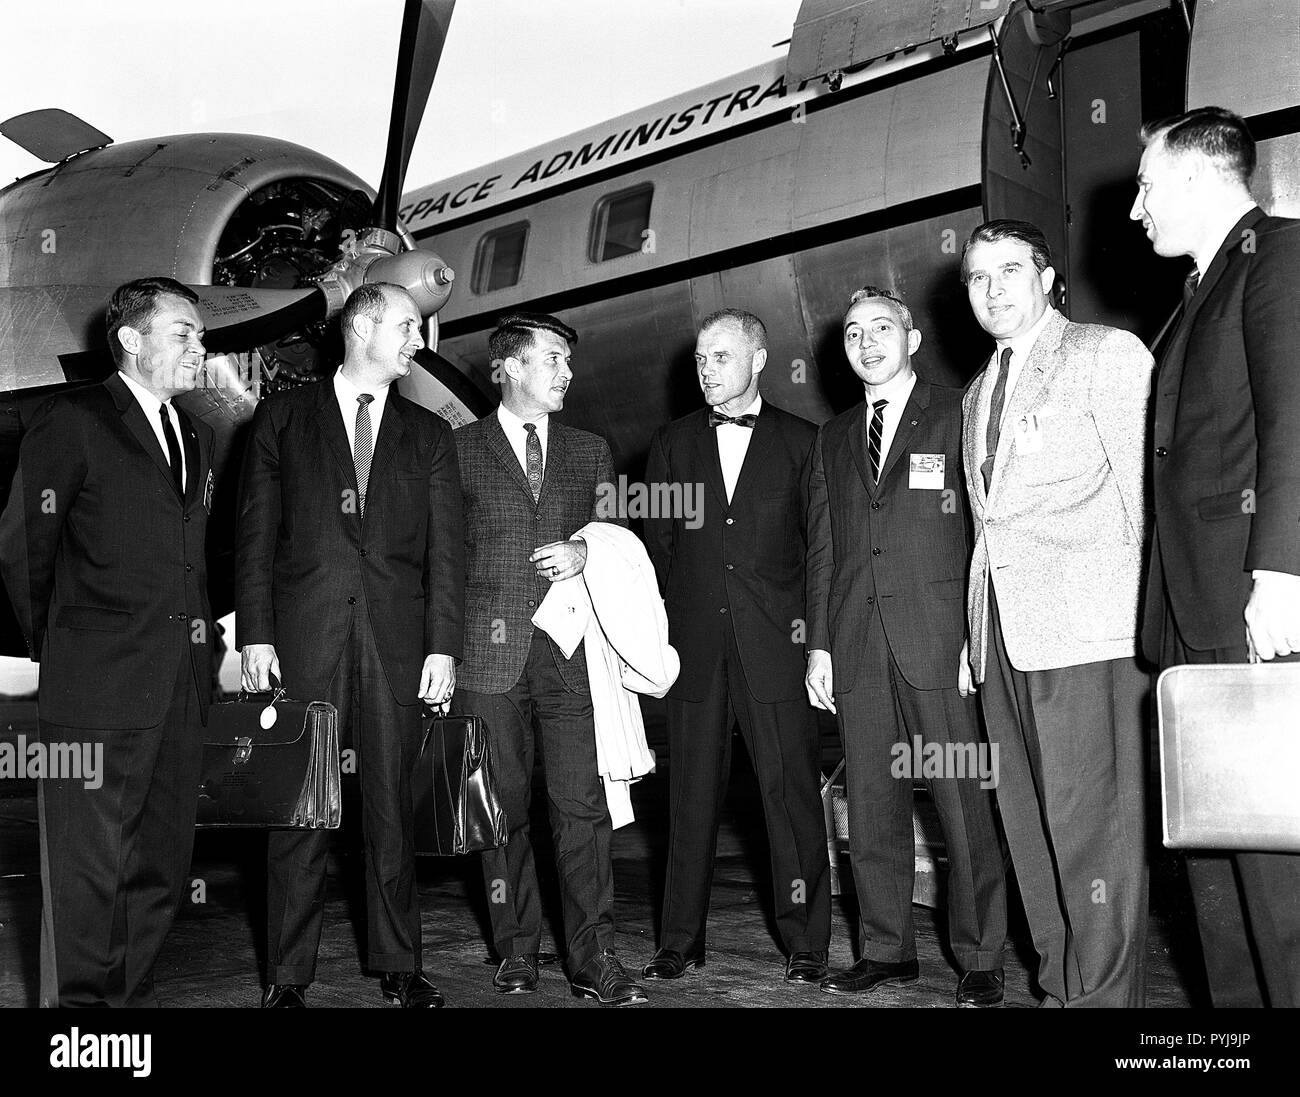 This photograph was taken in September 1962 during one such visit. From left to right are Elliot See, Tom Stafford, Wally Schirra, John Glenn, Brainerd Holmes, Dr. von Braun, and Jim Lovell. Stock Photo